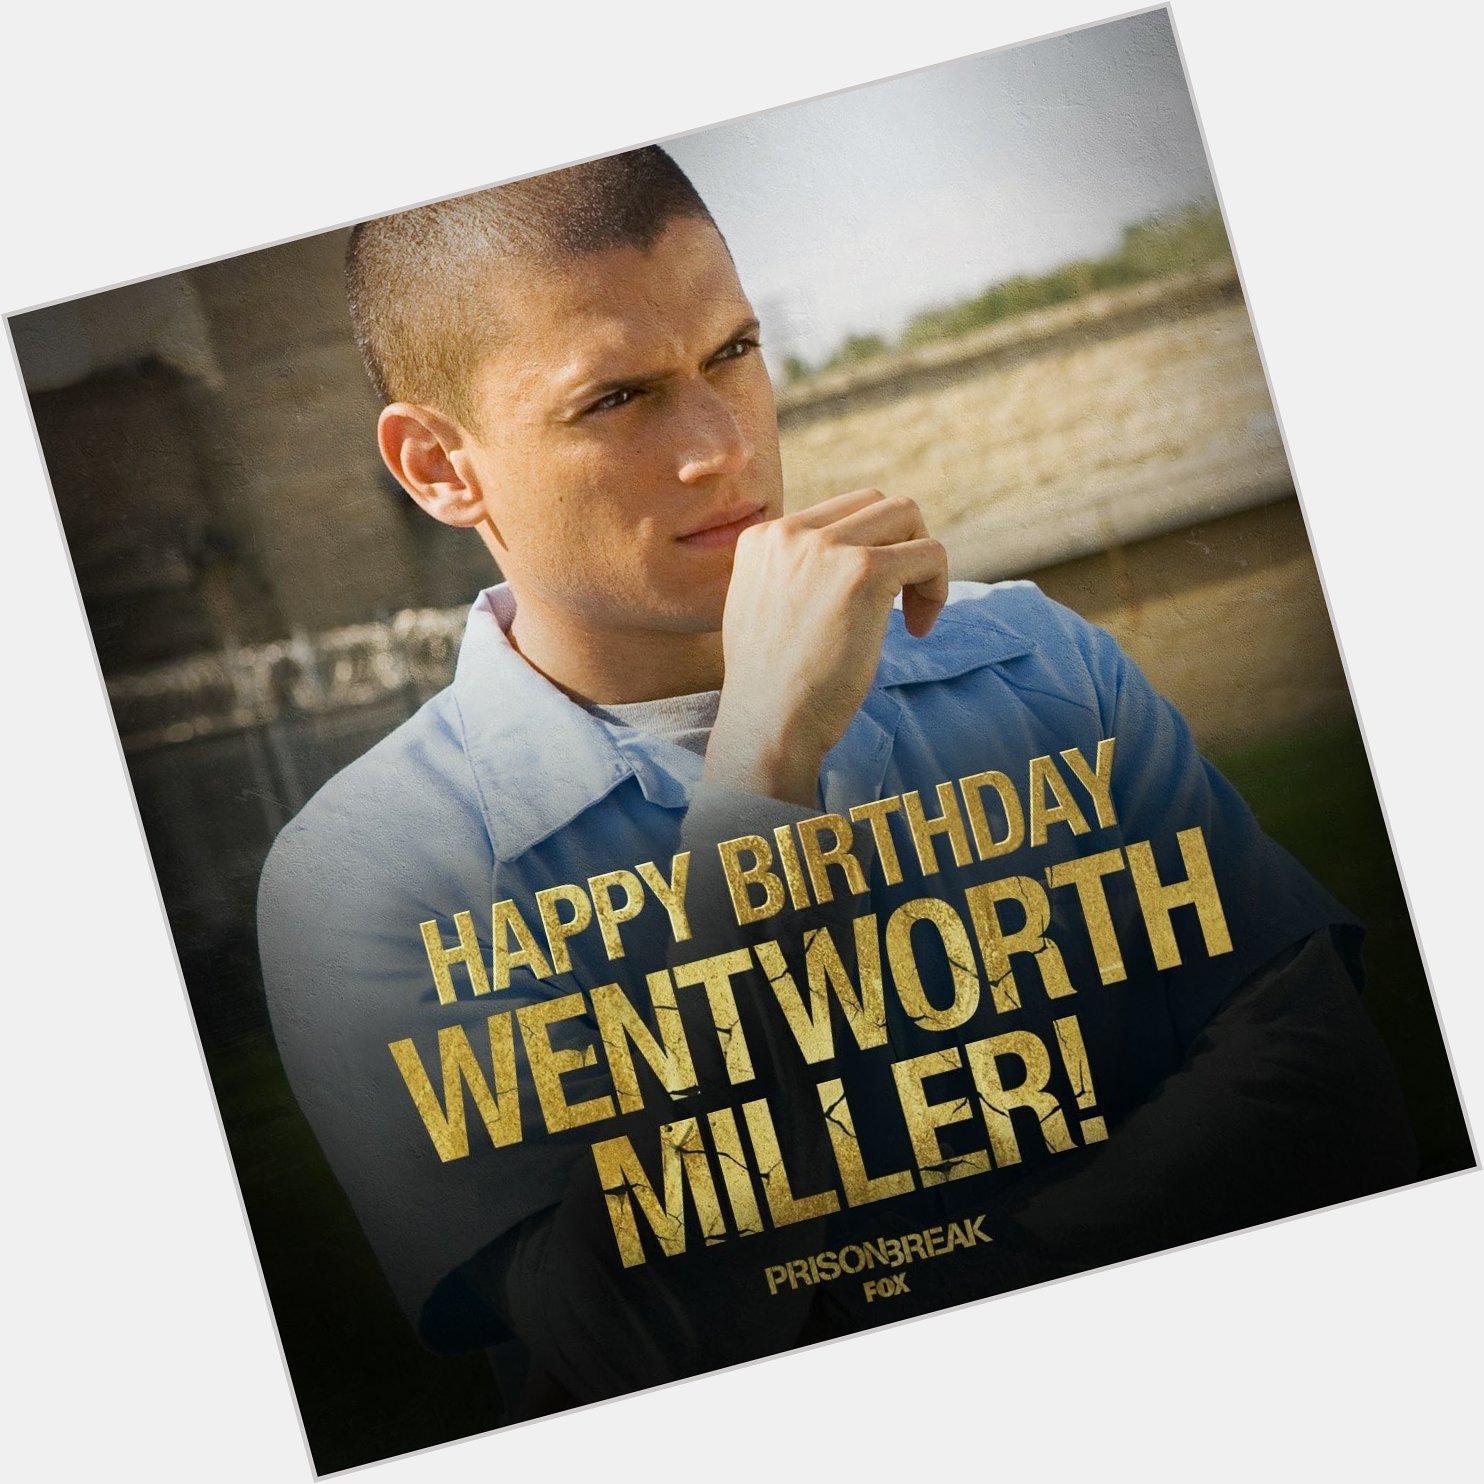 Happy Birthday to one of the best actors, Wentworth Miller   